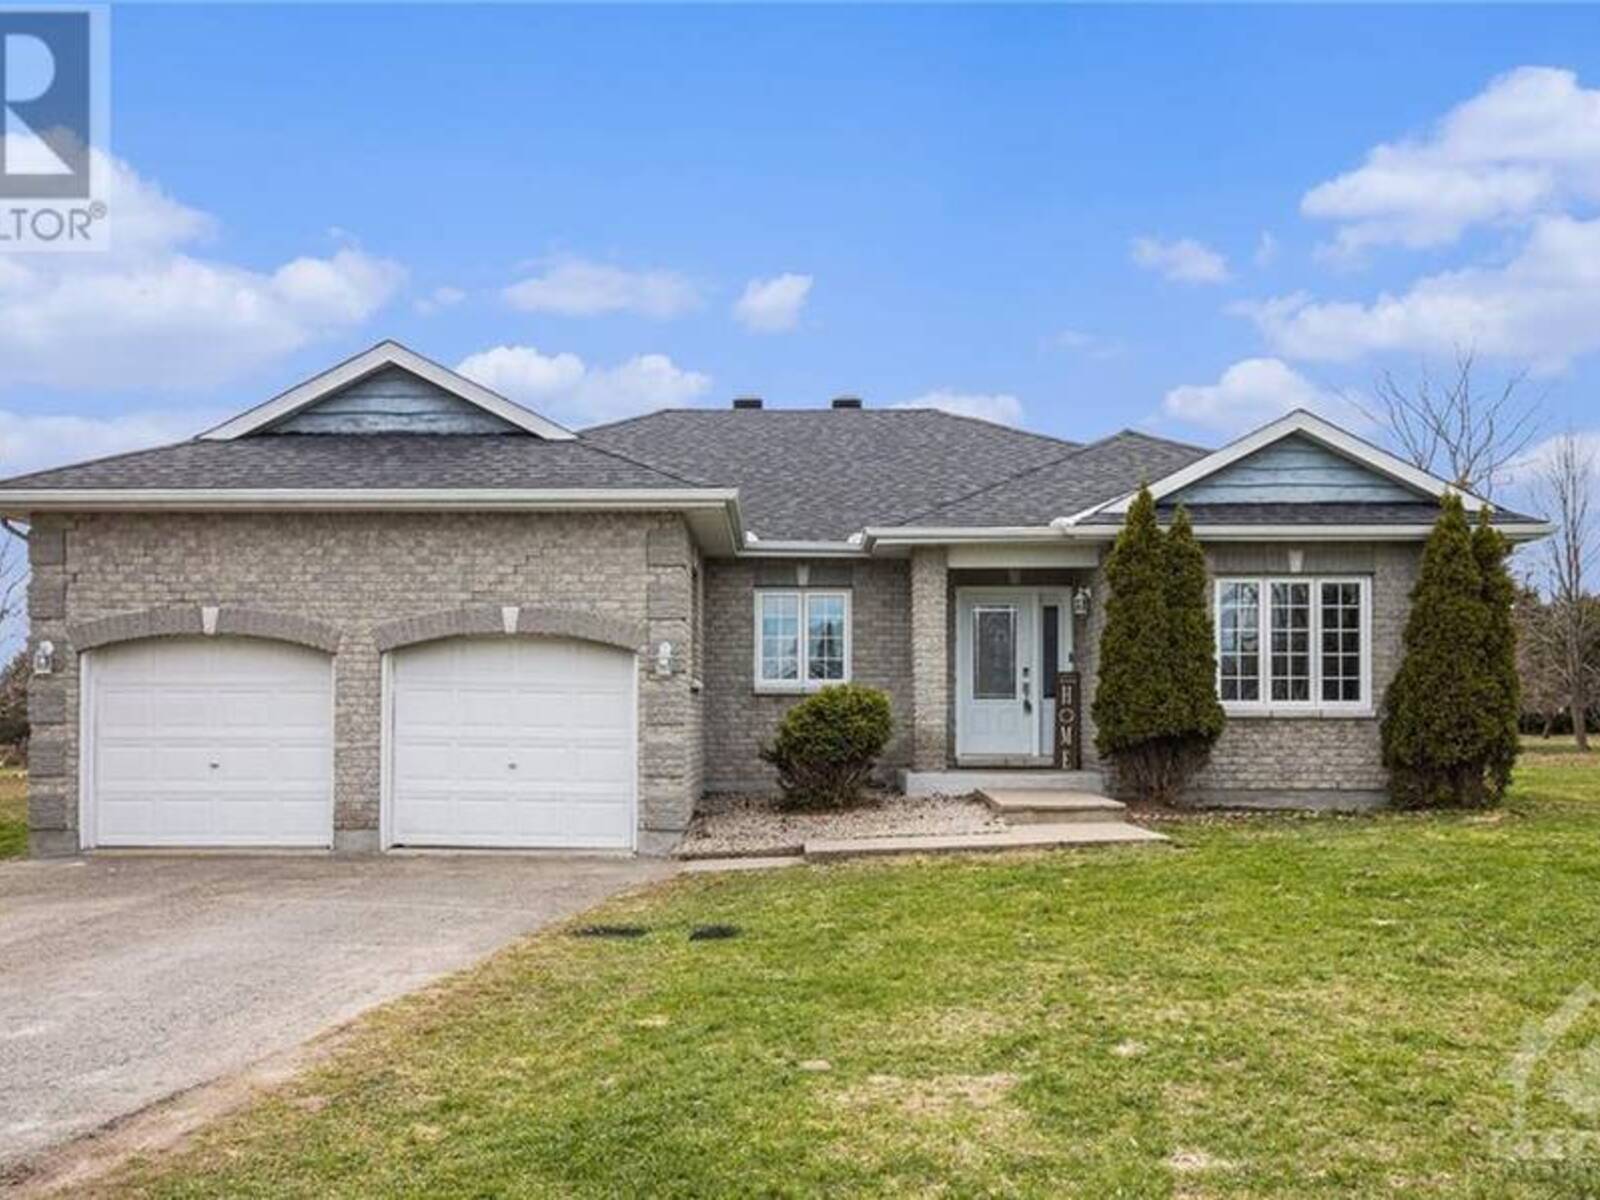 10 MEADOWVIEW DRIVE, Oxford Station, Ontario K0G 1T0